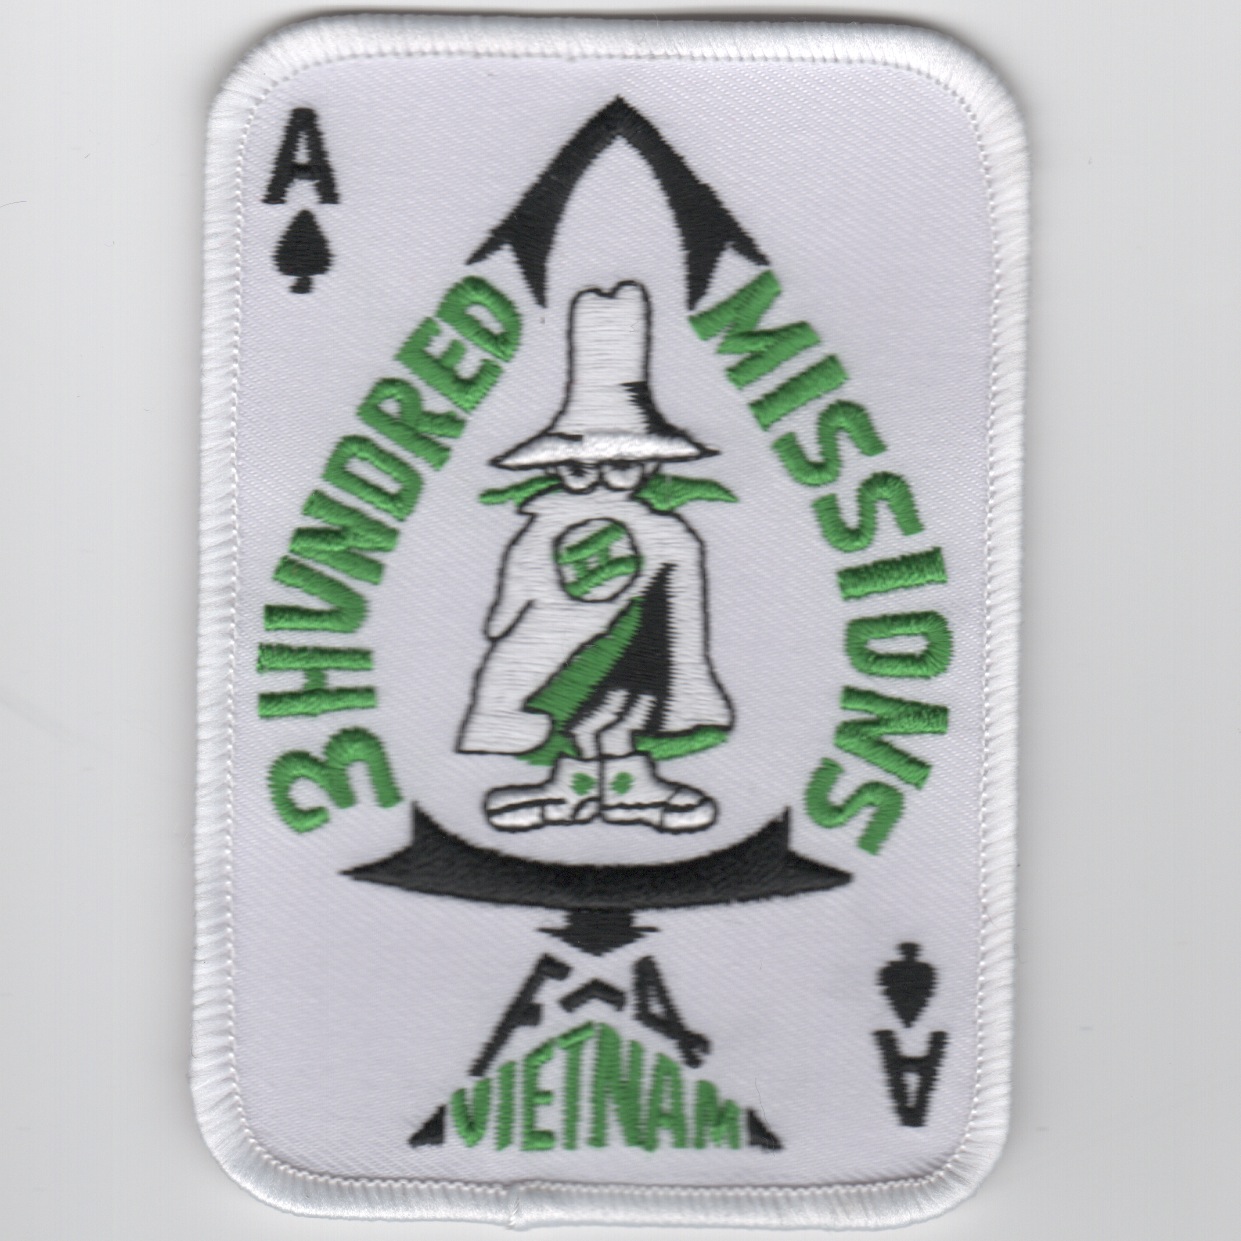 F-4 300 Missions Patch